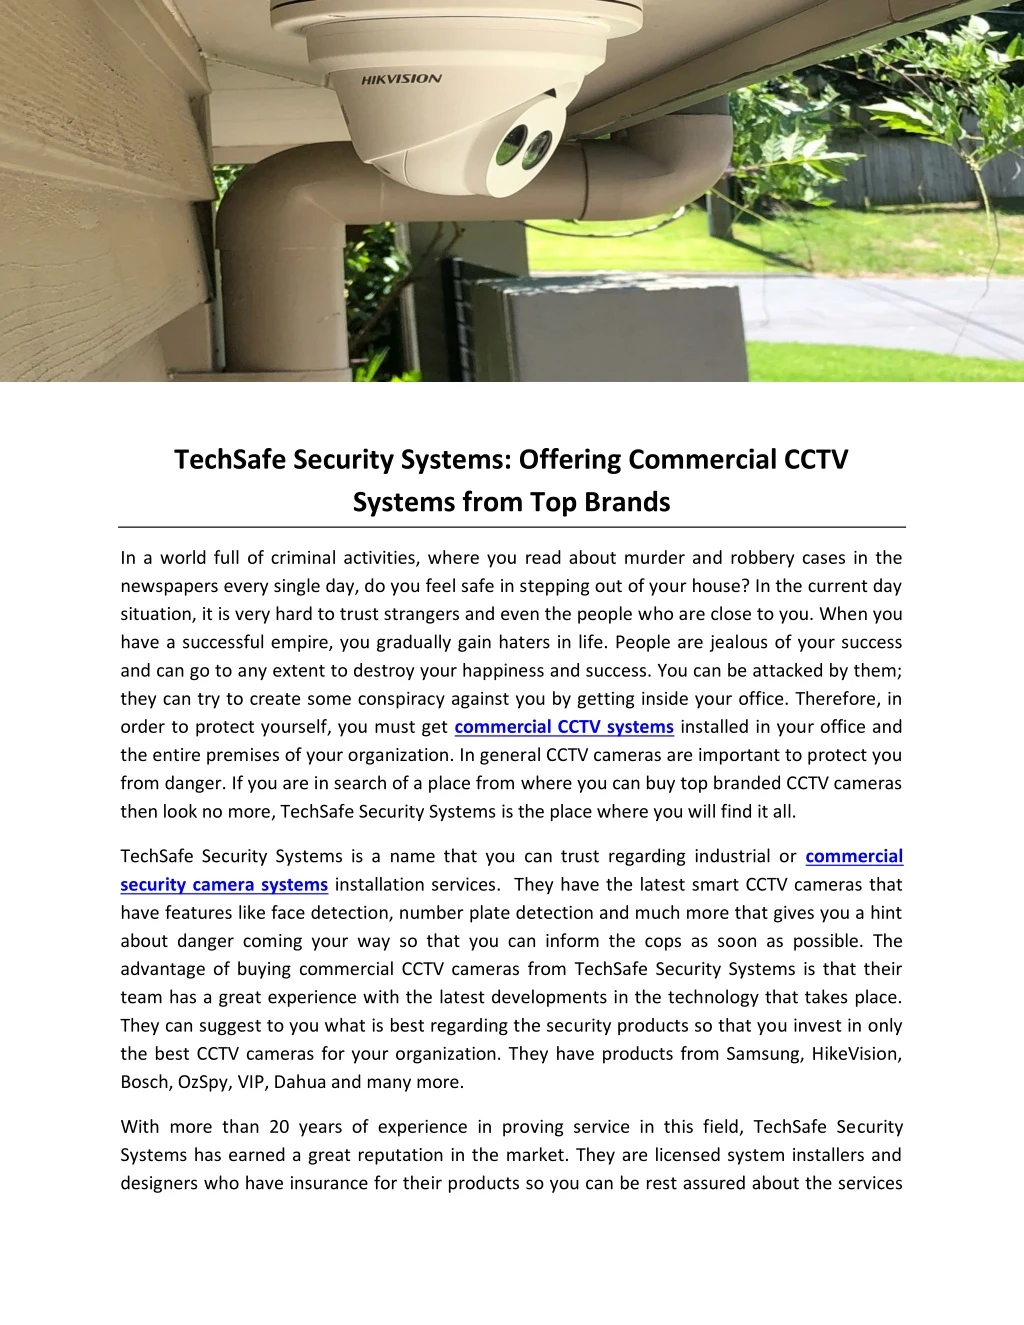 techsafe security systems offering commercial